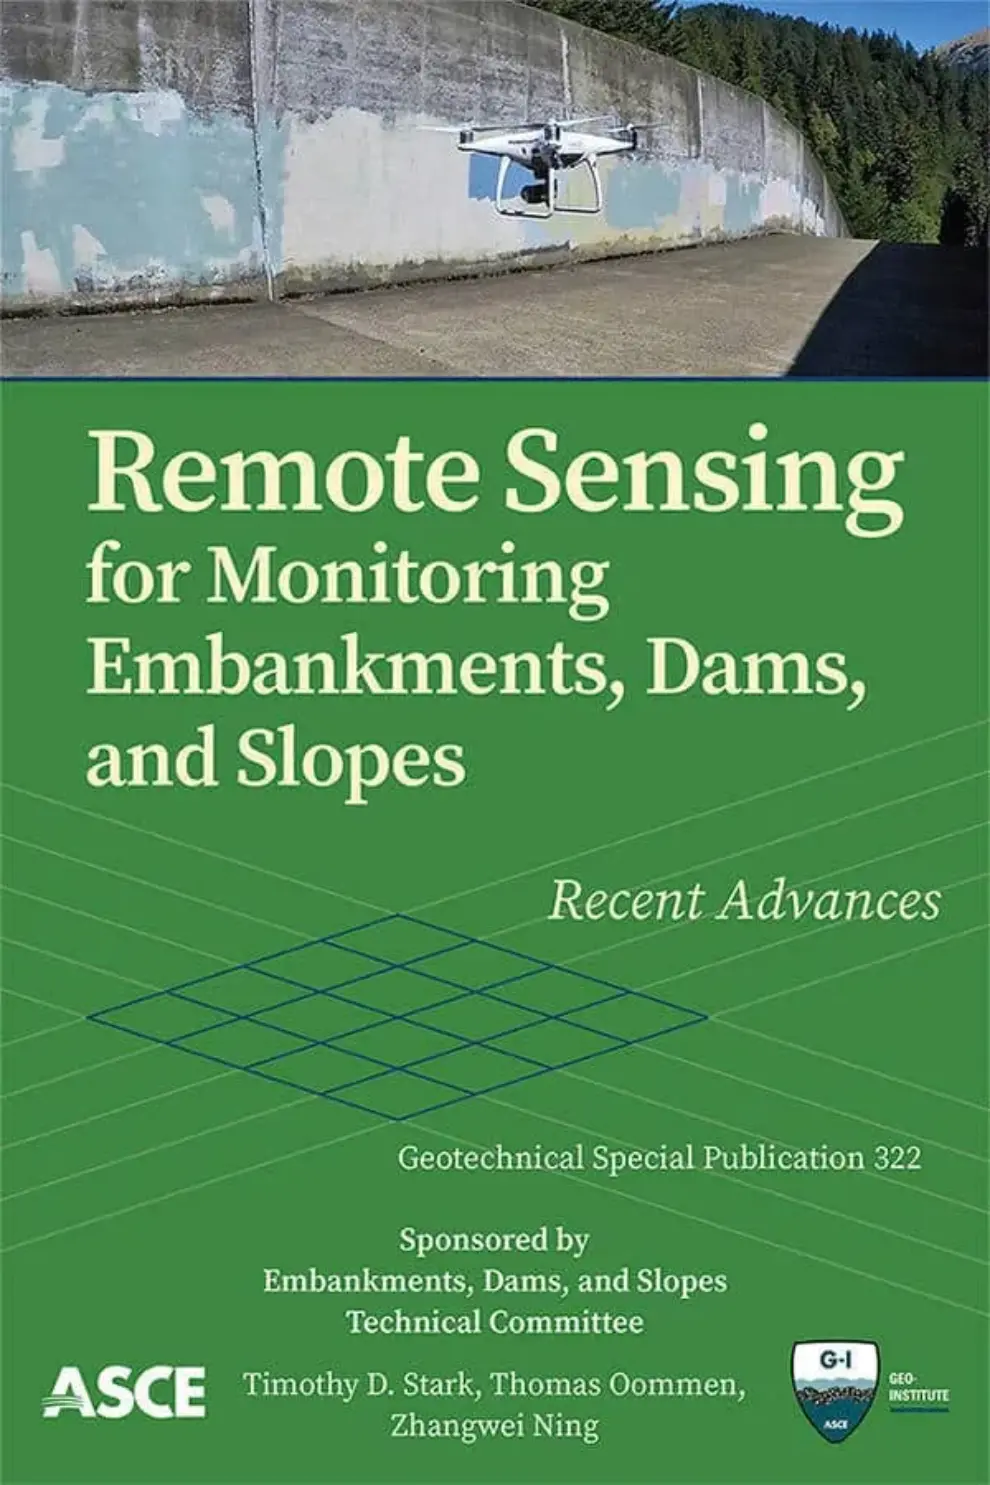 New ASCE Publication Offers Guidance on Using Remote Sensing Monitoring